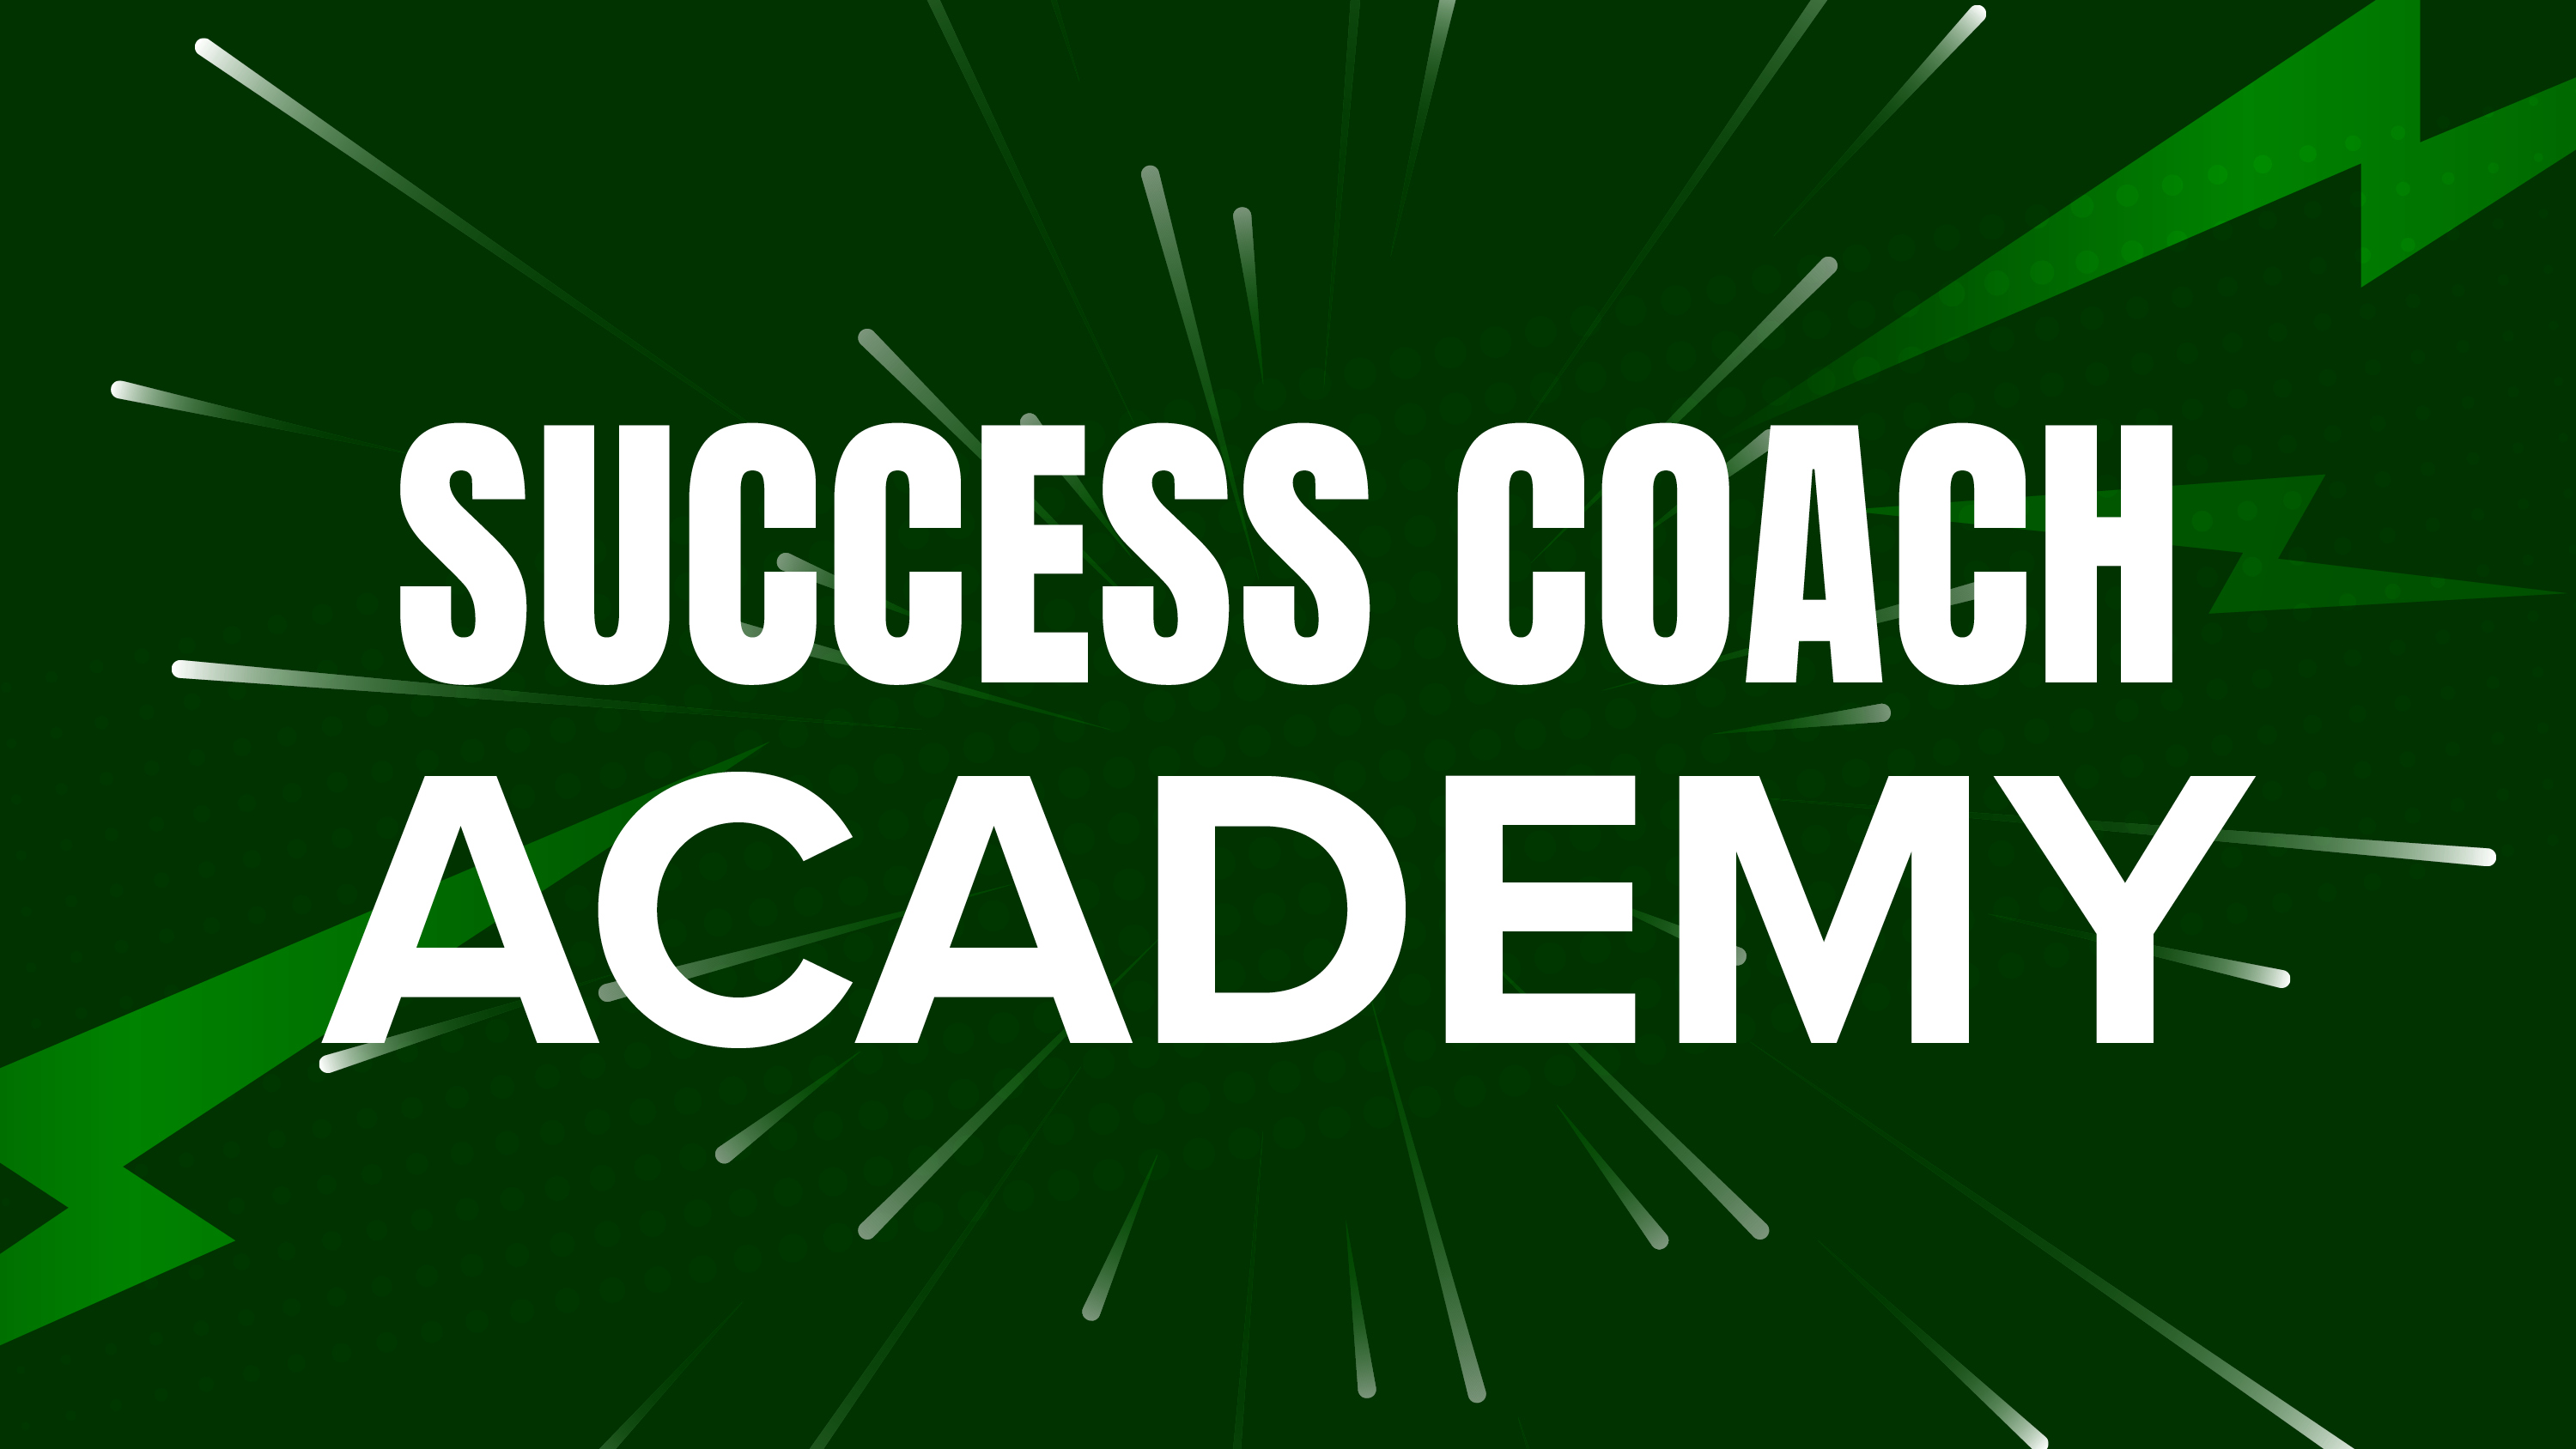 Success Coach Academy with bursts of green